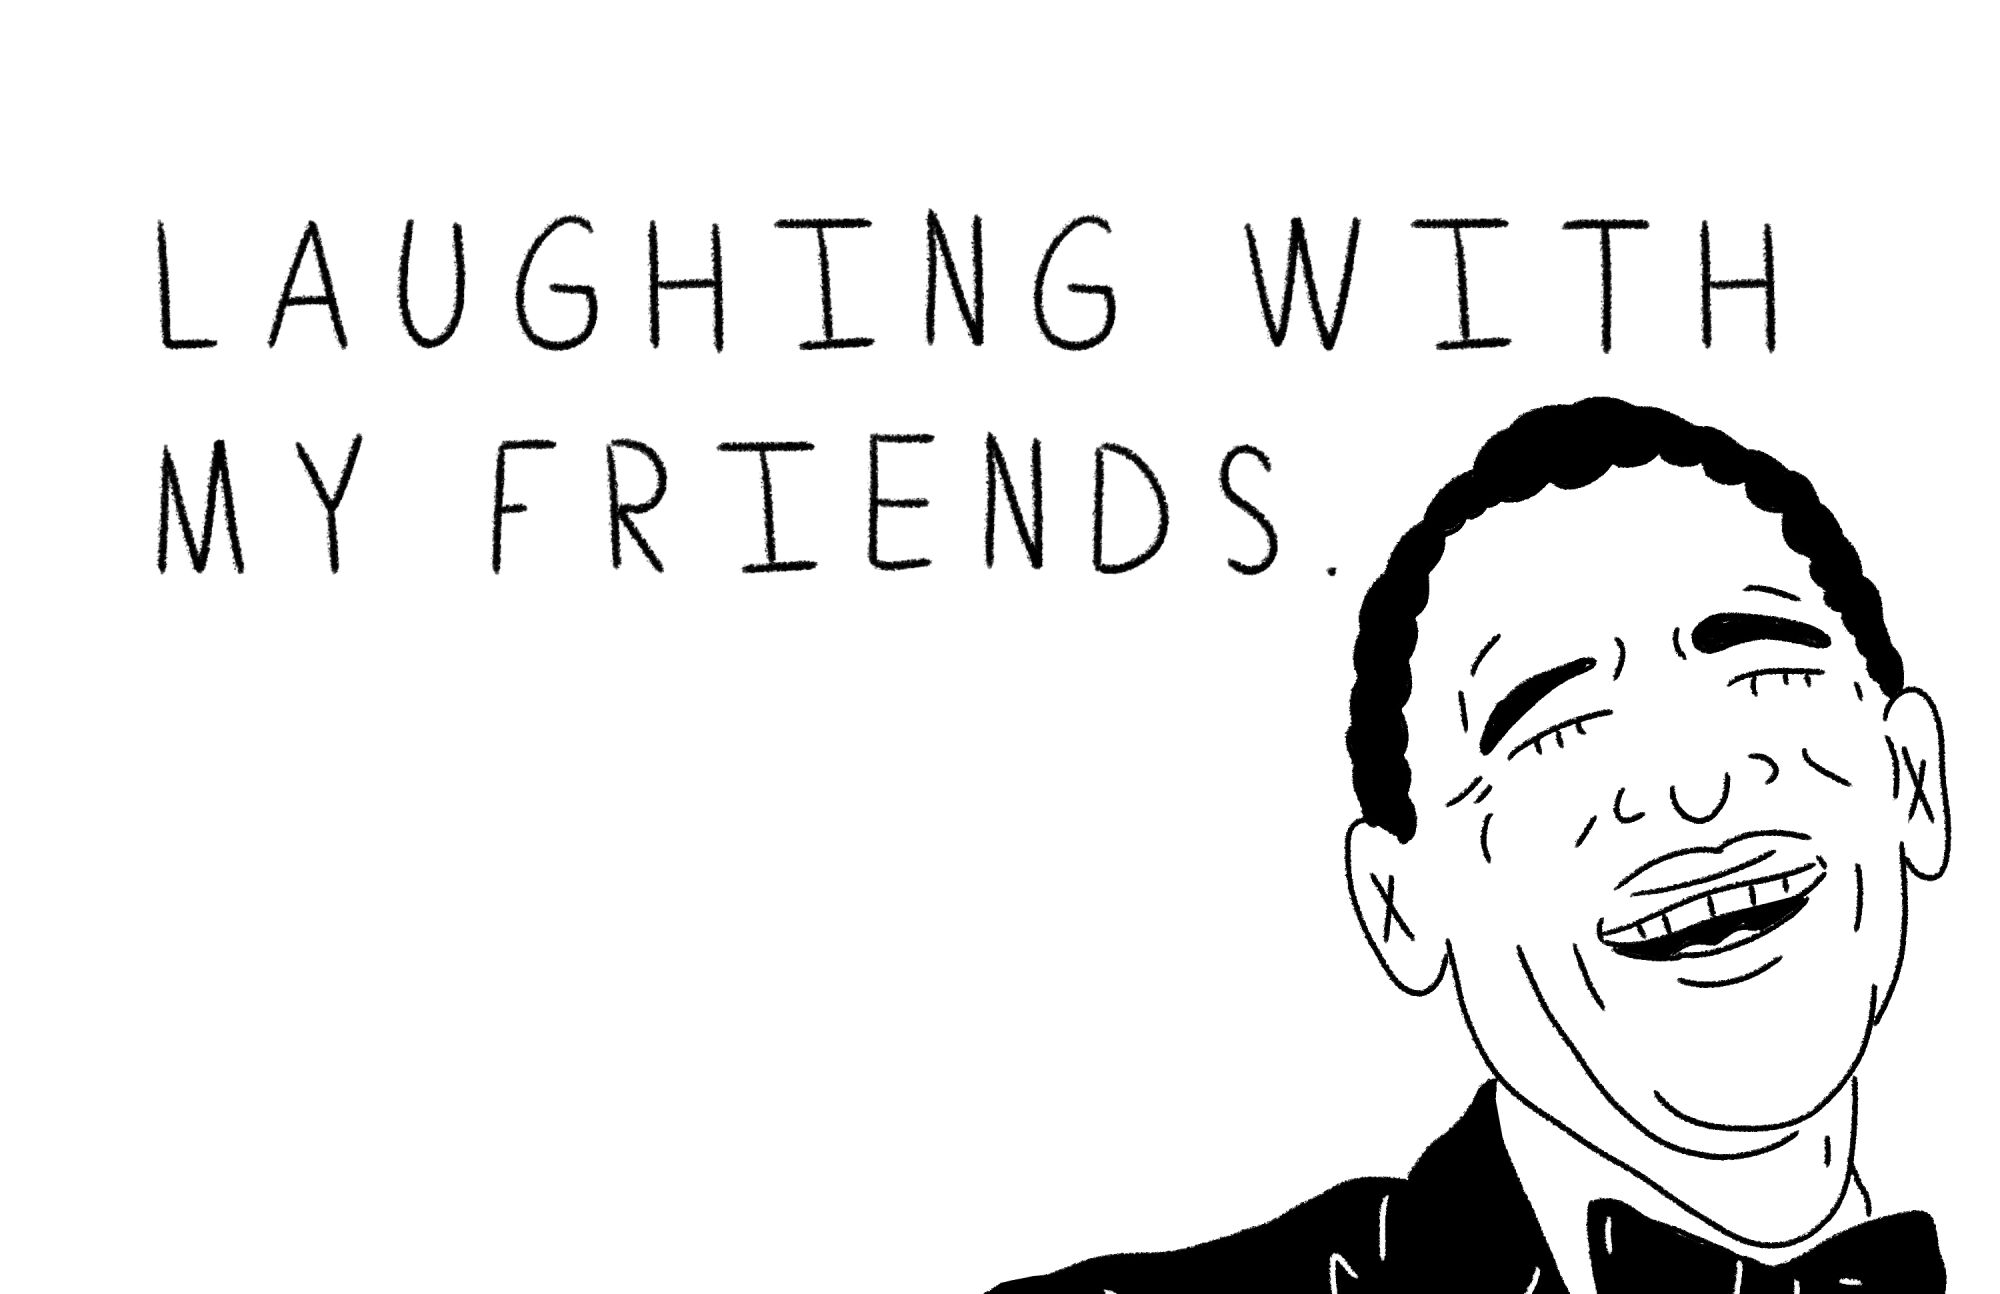 Quote reads "laughing with my friends" with an illustrated laughing man